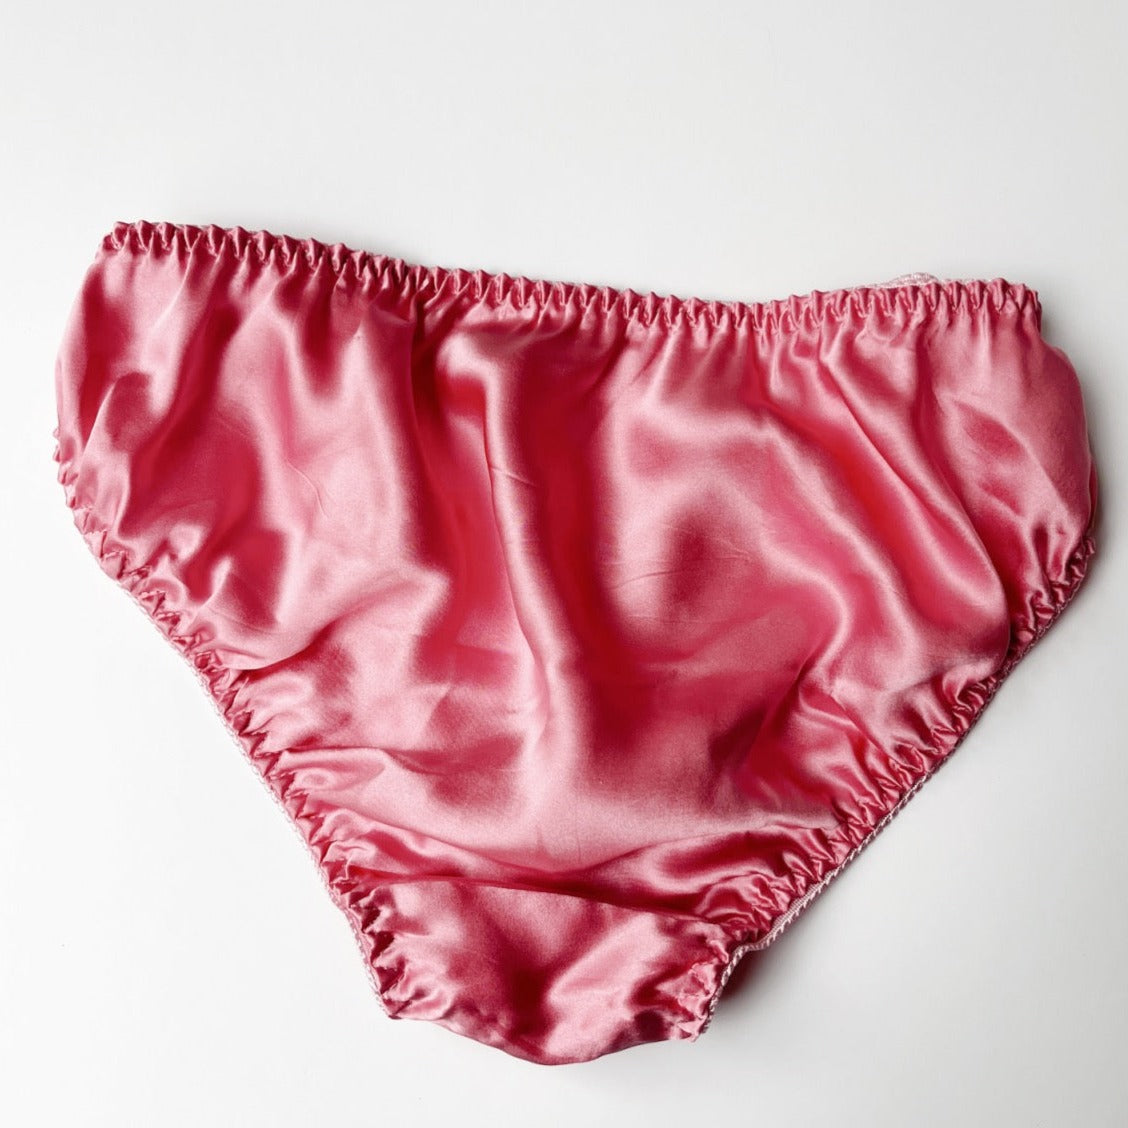 pink red pure silk underwear for women, silk panties, made in Canada silk lingerie and apparel